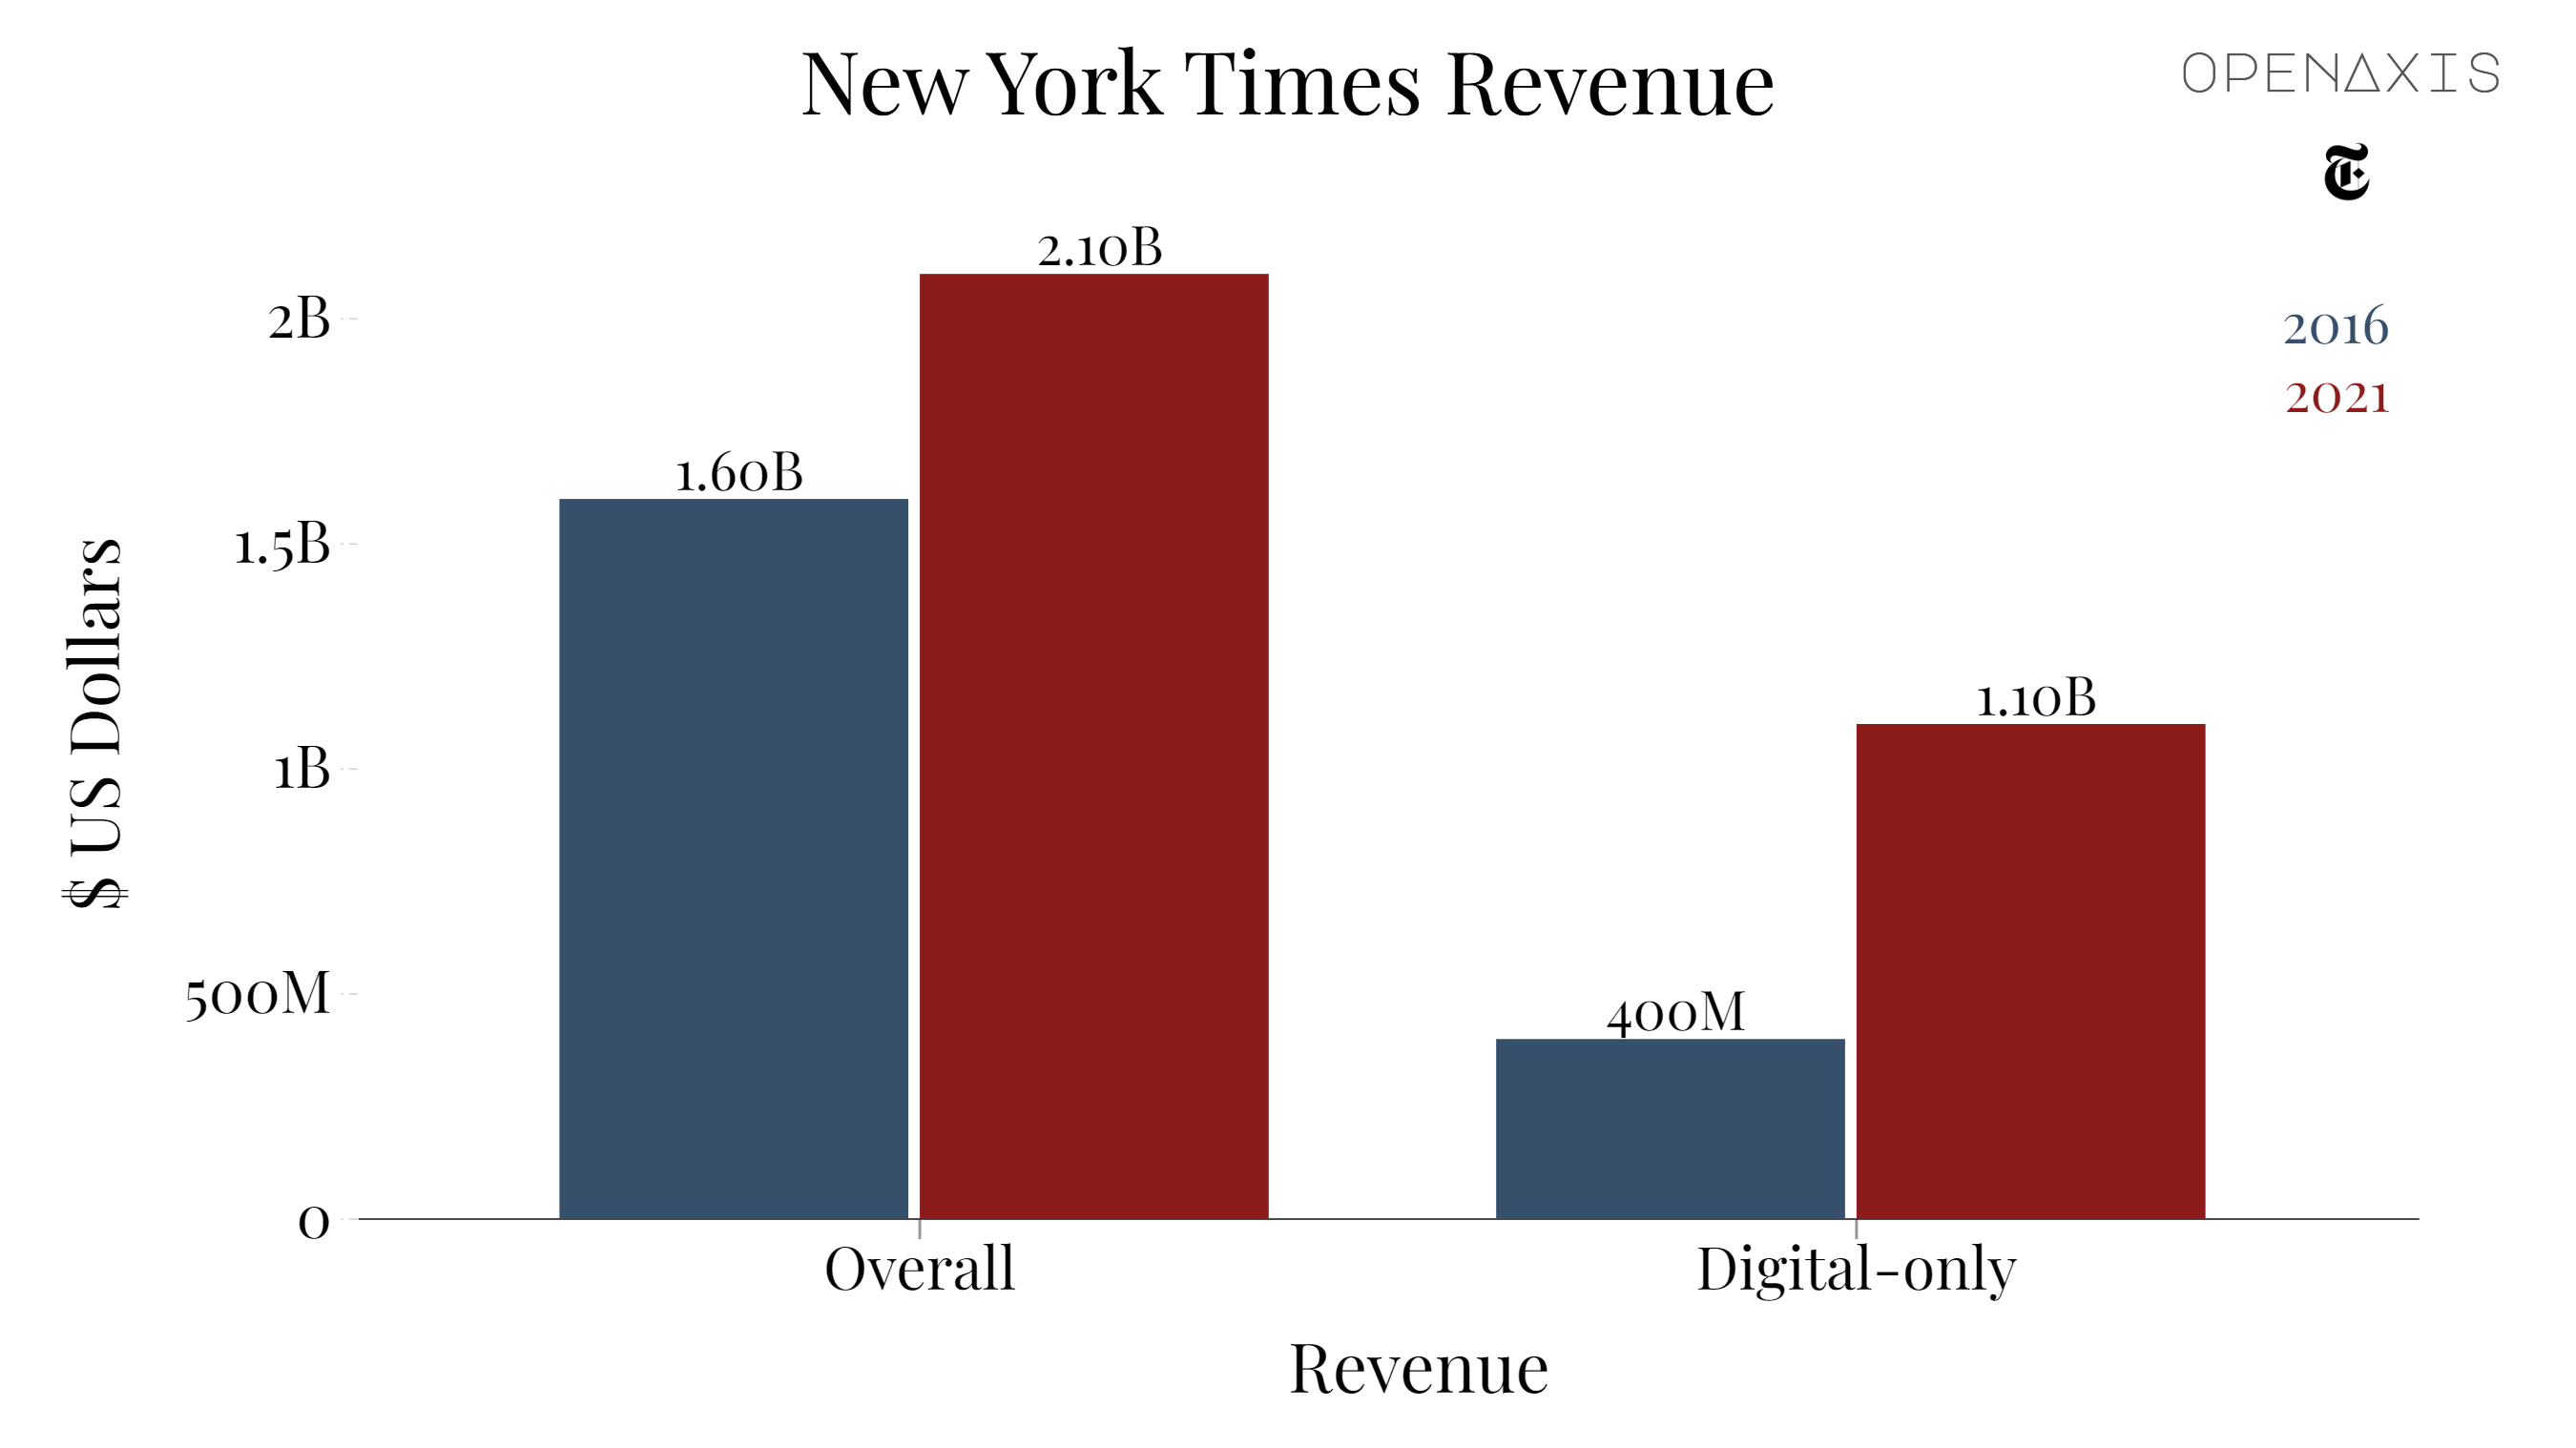 <p>The New York Times has seen subscription revenue soar from 2016 to 2021, with digital making up a little over half of overall revenue.</p><p><br /></p><p>In June 2022, the Times announced its plans to reach 15 million subscribers by the end of 2027, after surpassing 10 million subscribers a few months earlier in February.</p><p><br /></p><p>Recent acquisitions include The Athletic, a digital sports publisher, for $550 million and Wordle, the trivia game, for an estimated $1 million.</p><p><br /></p><p><span data-index="0" data-denotation-char data-id="0" data-value="&lt;a href=&quot;/search?q=%23news&quot; target=_self&gt;#news" data-link="/search?q=%23news">﻿<span contenteditable="false"><span></span><a href="/search?q=%23news" target="_self">#news</a></span>﻿</span> <span data-index="0" data-denotation-char data-id="0" data-value="&lt;a href=&quot;/search?q=%23journalism&quot; target=_self&gt;#journalism" data-link="/search?q=%23journalism">﻿<span contenteditable="false"><span></span><a href="/search?q=%23journalism" target="_self">#journalism</a></span>﻿</span></p><p><br /></p><p>Source: <a href="https://app.openaxis.com/data/3851" target="_blank">New York Times</a></p><p><br /></p>